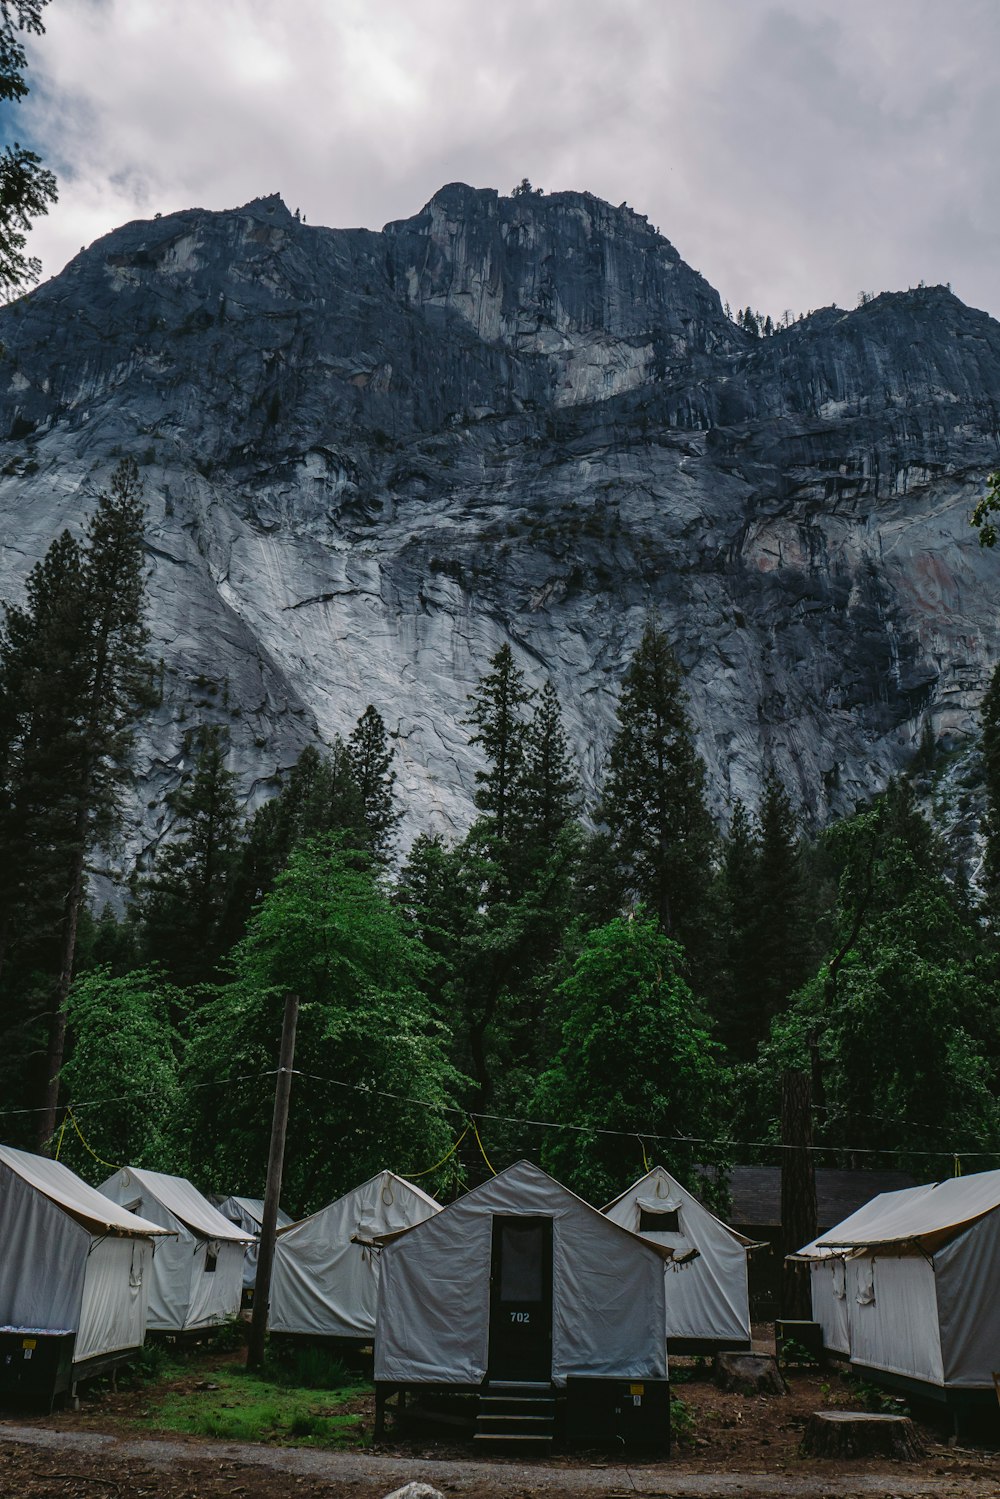 view photography of white house tents near trees under black and gray mountain